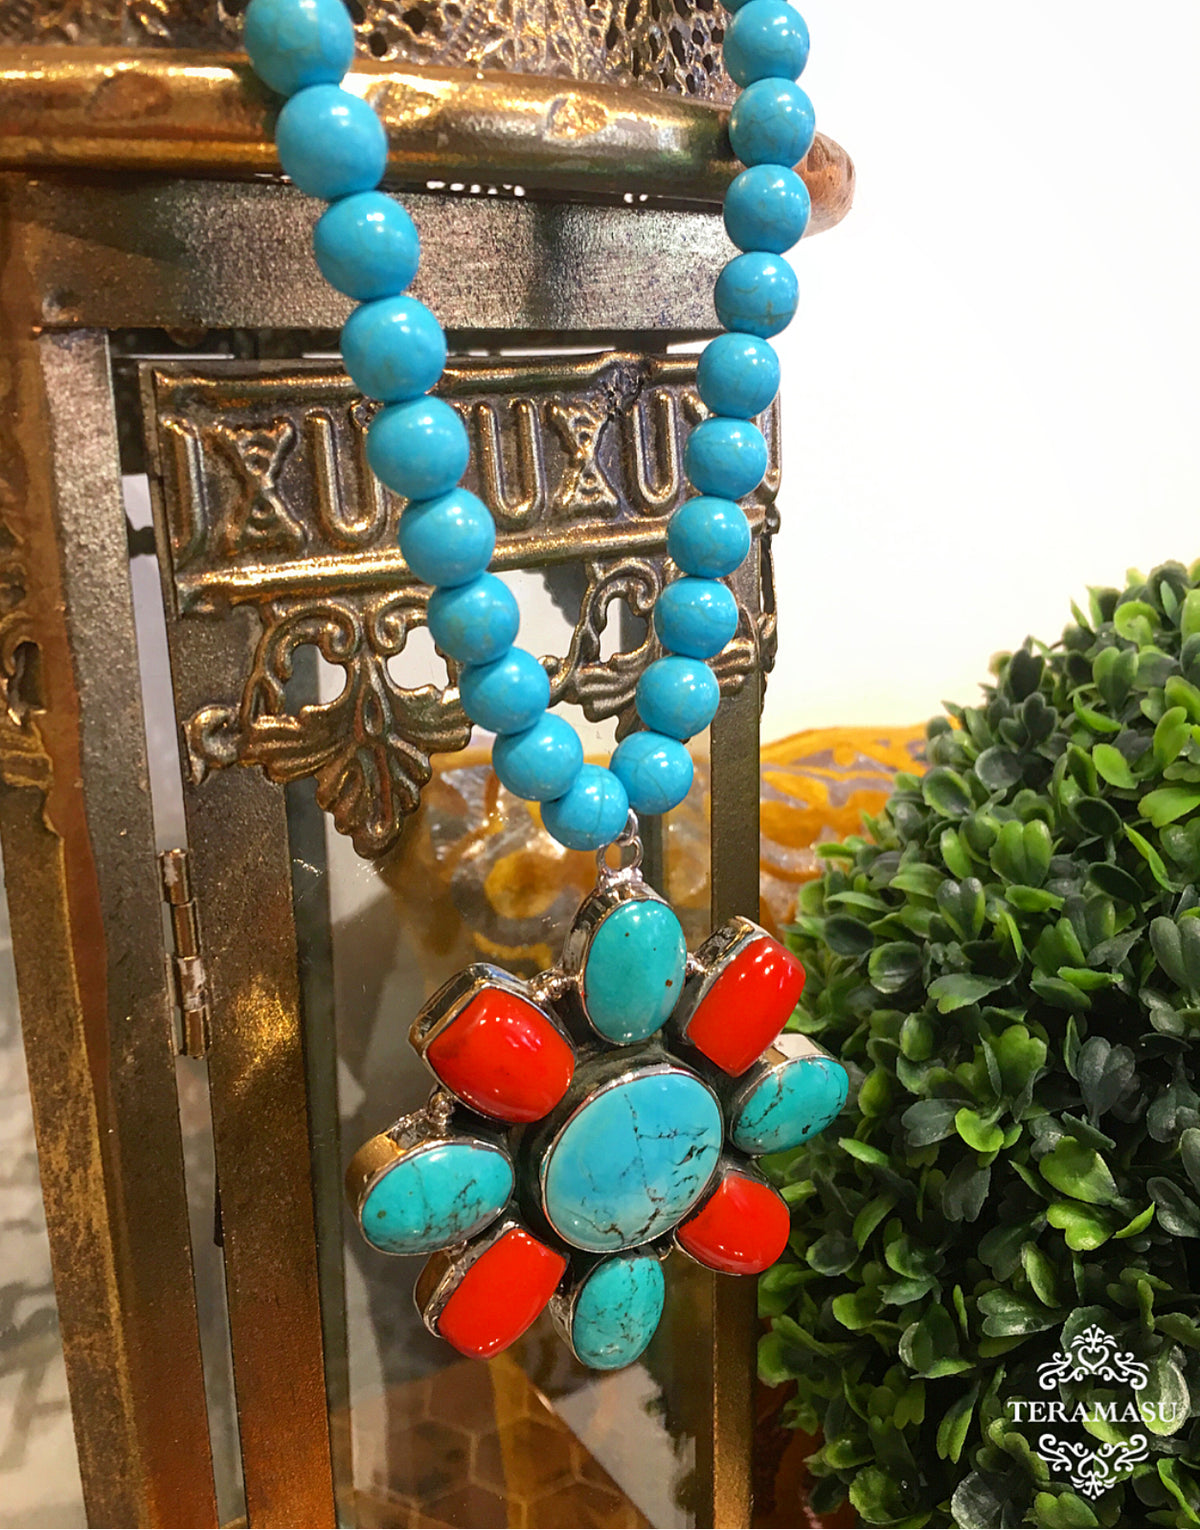 Chic Peek: Gorgeous & New, Handmade Designer Teramasu Blue Howlite Necklace with One-of-a-Kind Turquoise Floral Pendant